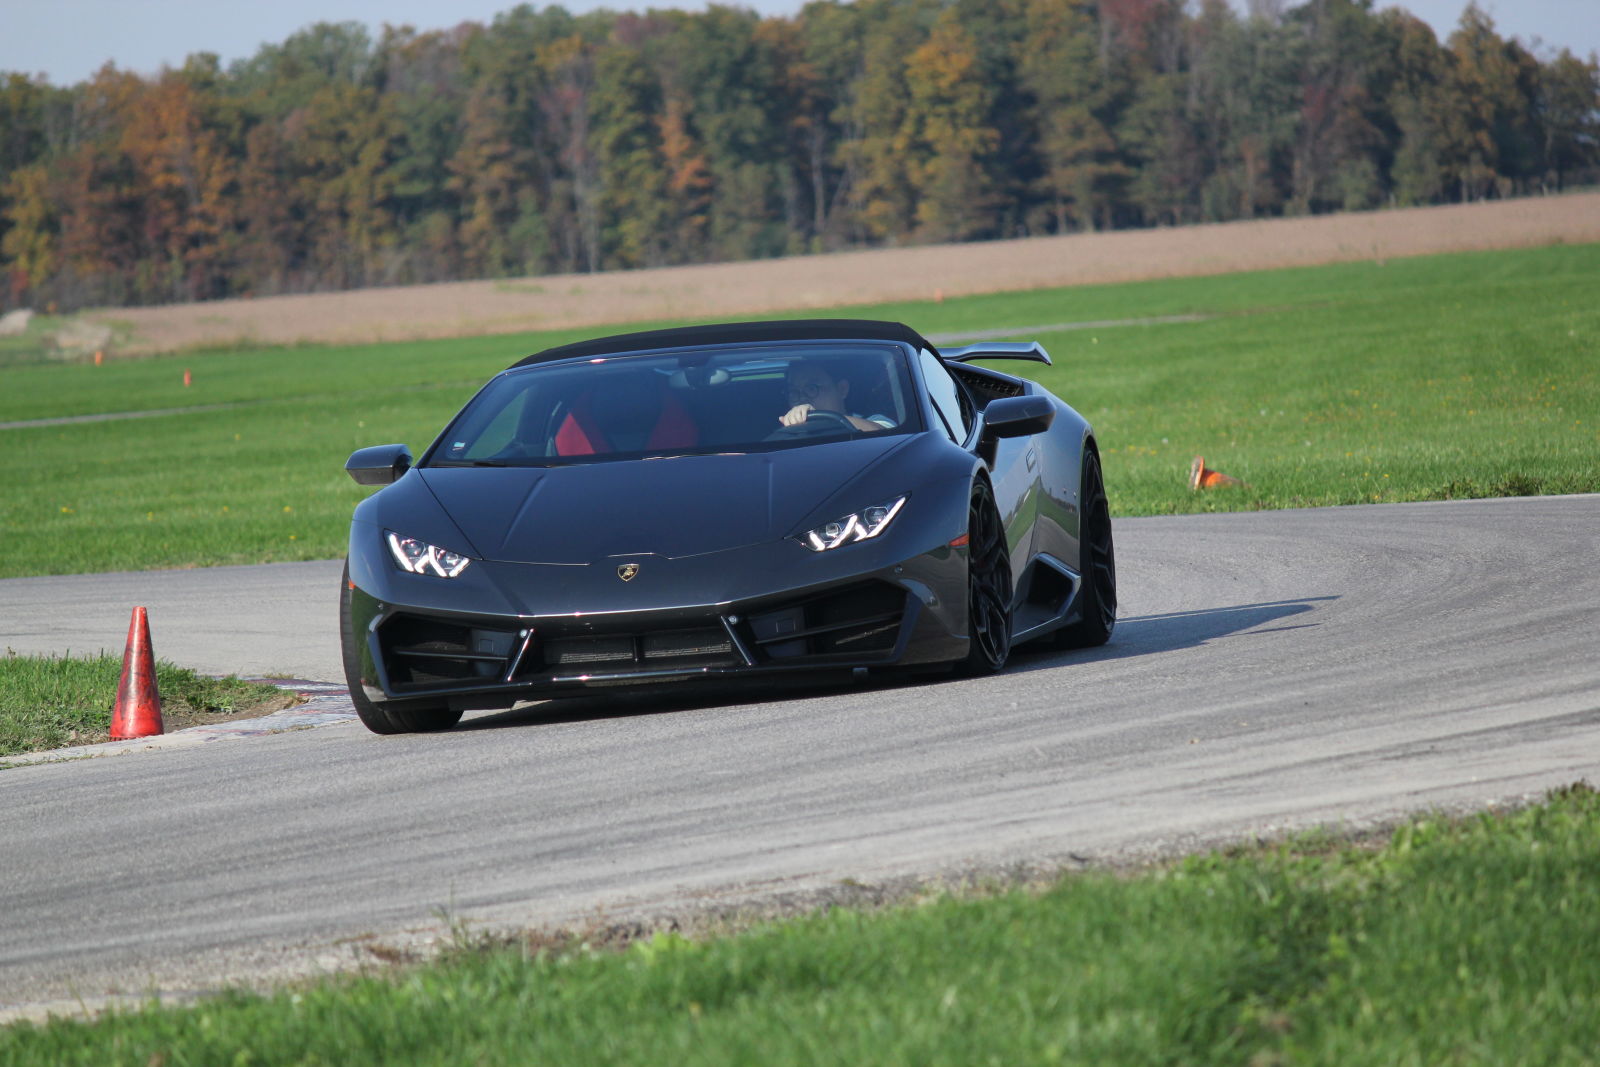 Why would I not shoot a Huracan on a track.